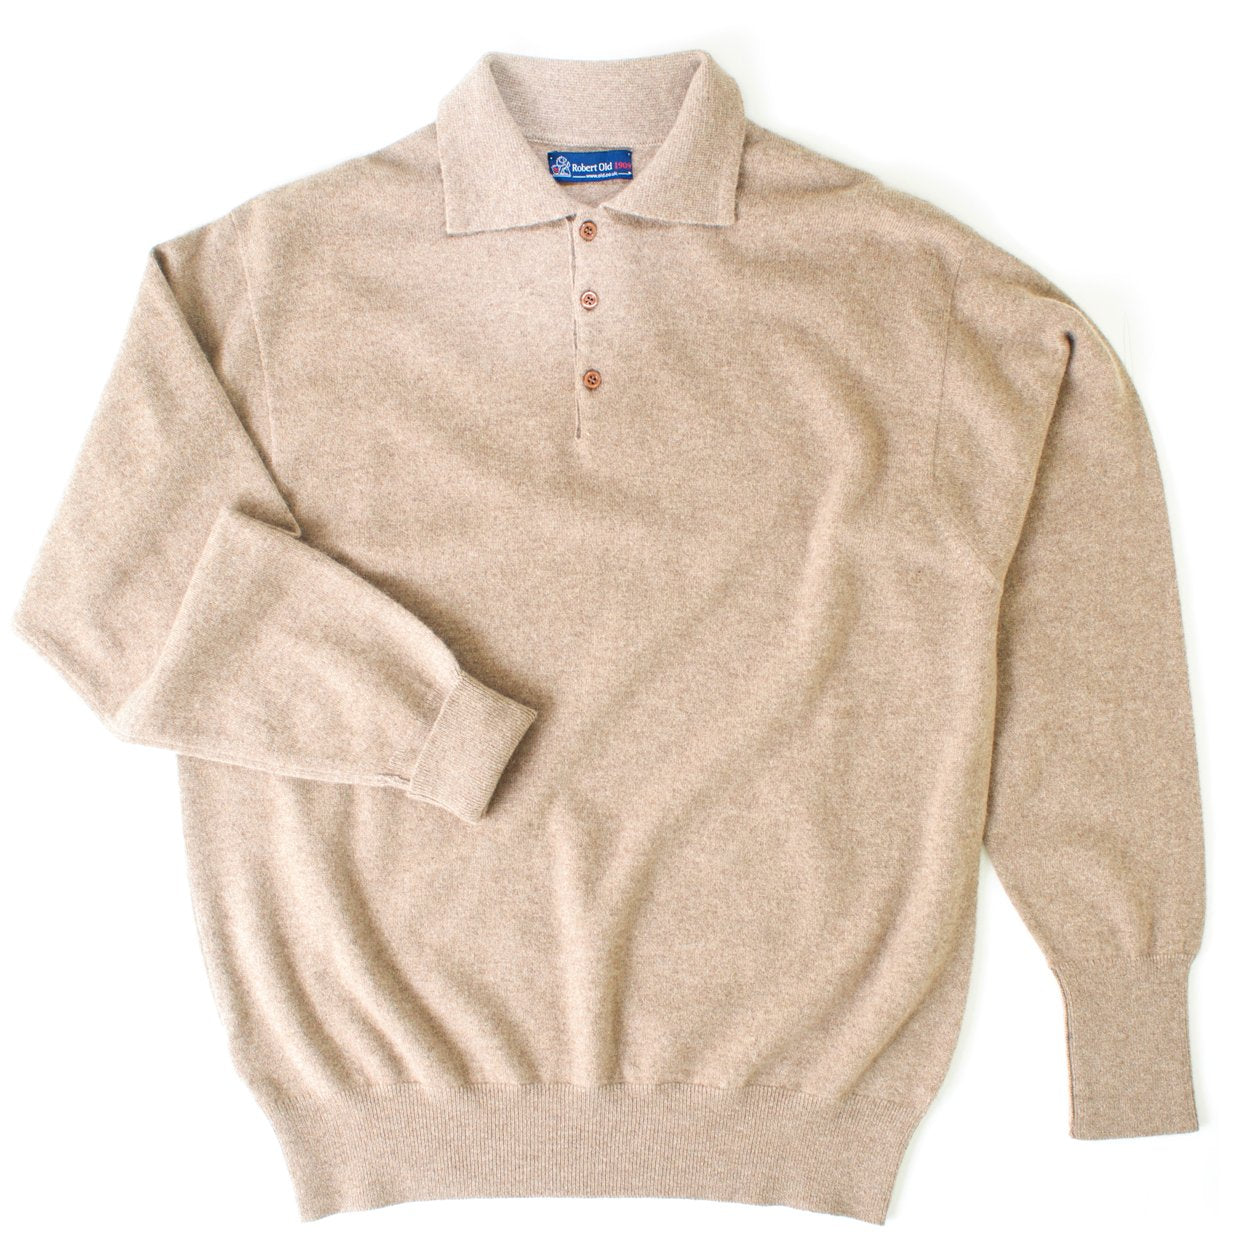 Linen Oban 3 button 2ply Cashmere Polo Sweater  Robert Old Linen UK 40" 